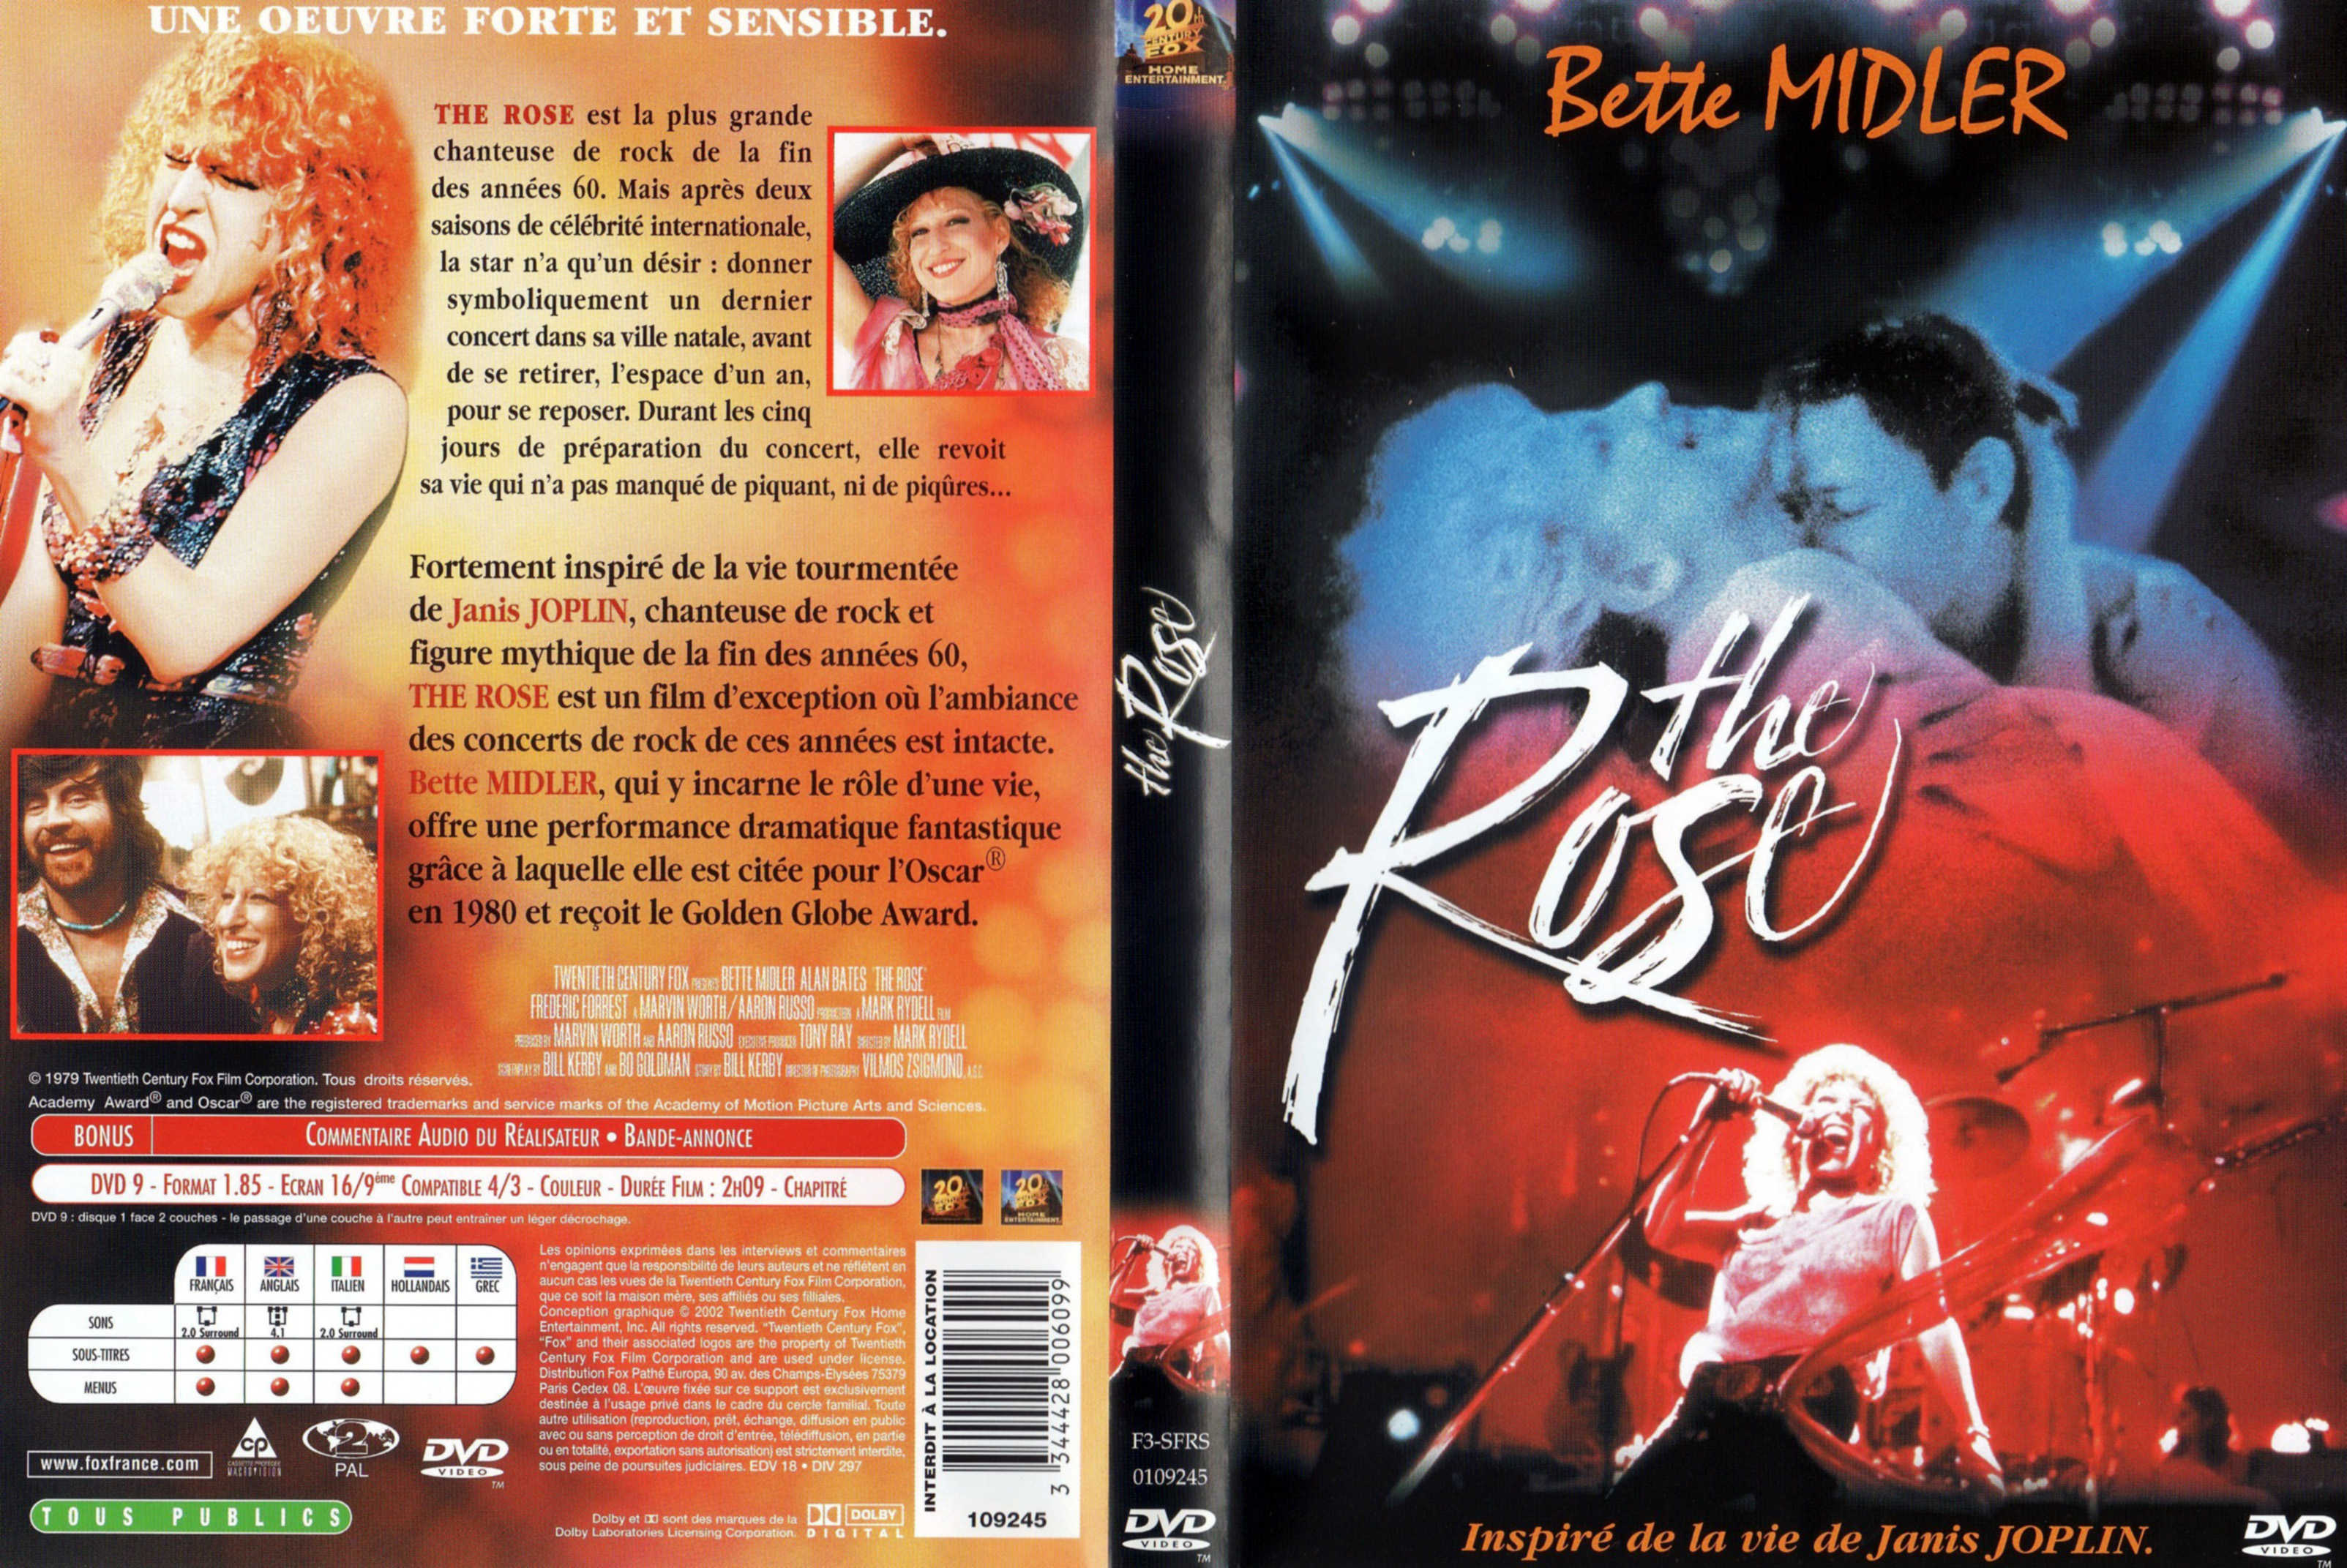 Jaquette DVD The rose